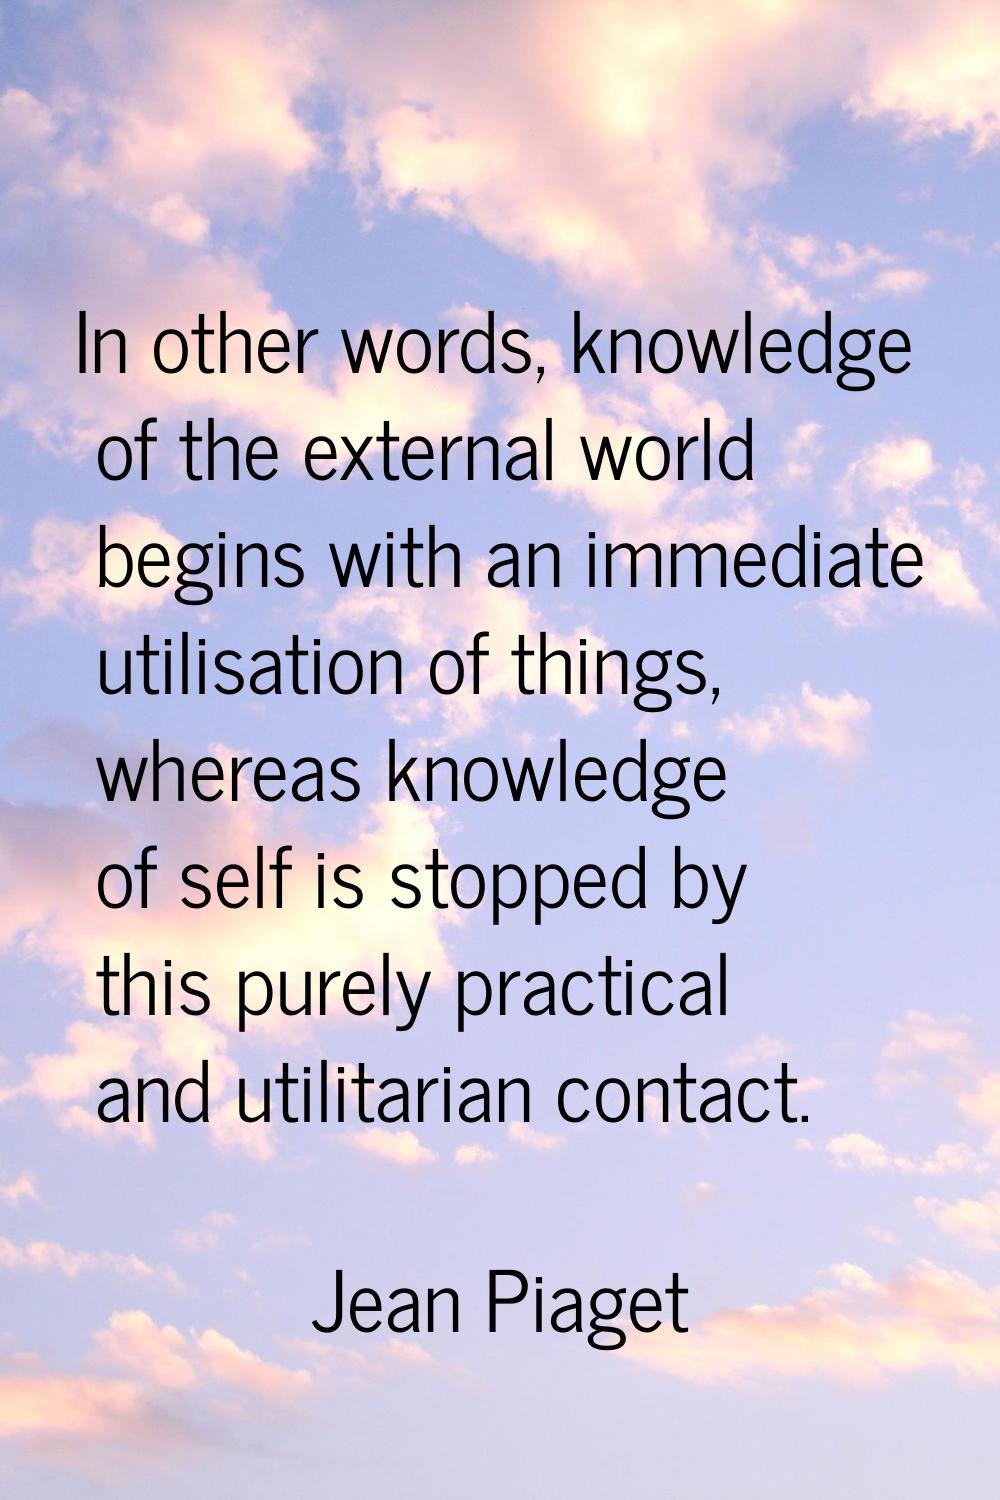 In other words, knowledge of the external world begins with an immediate utilisation of things, whe